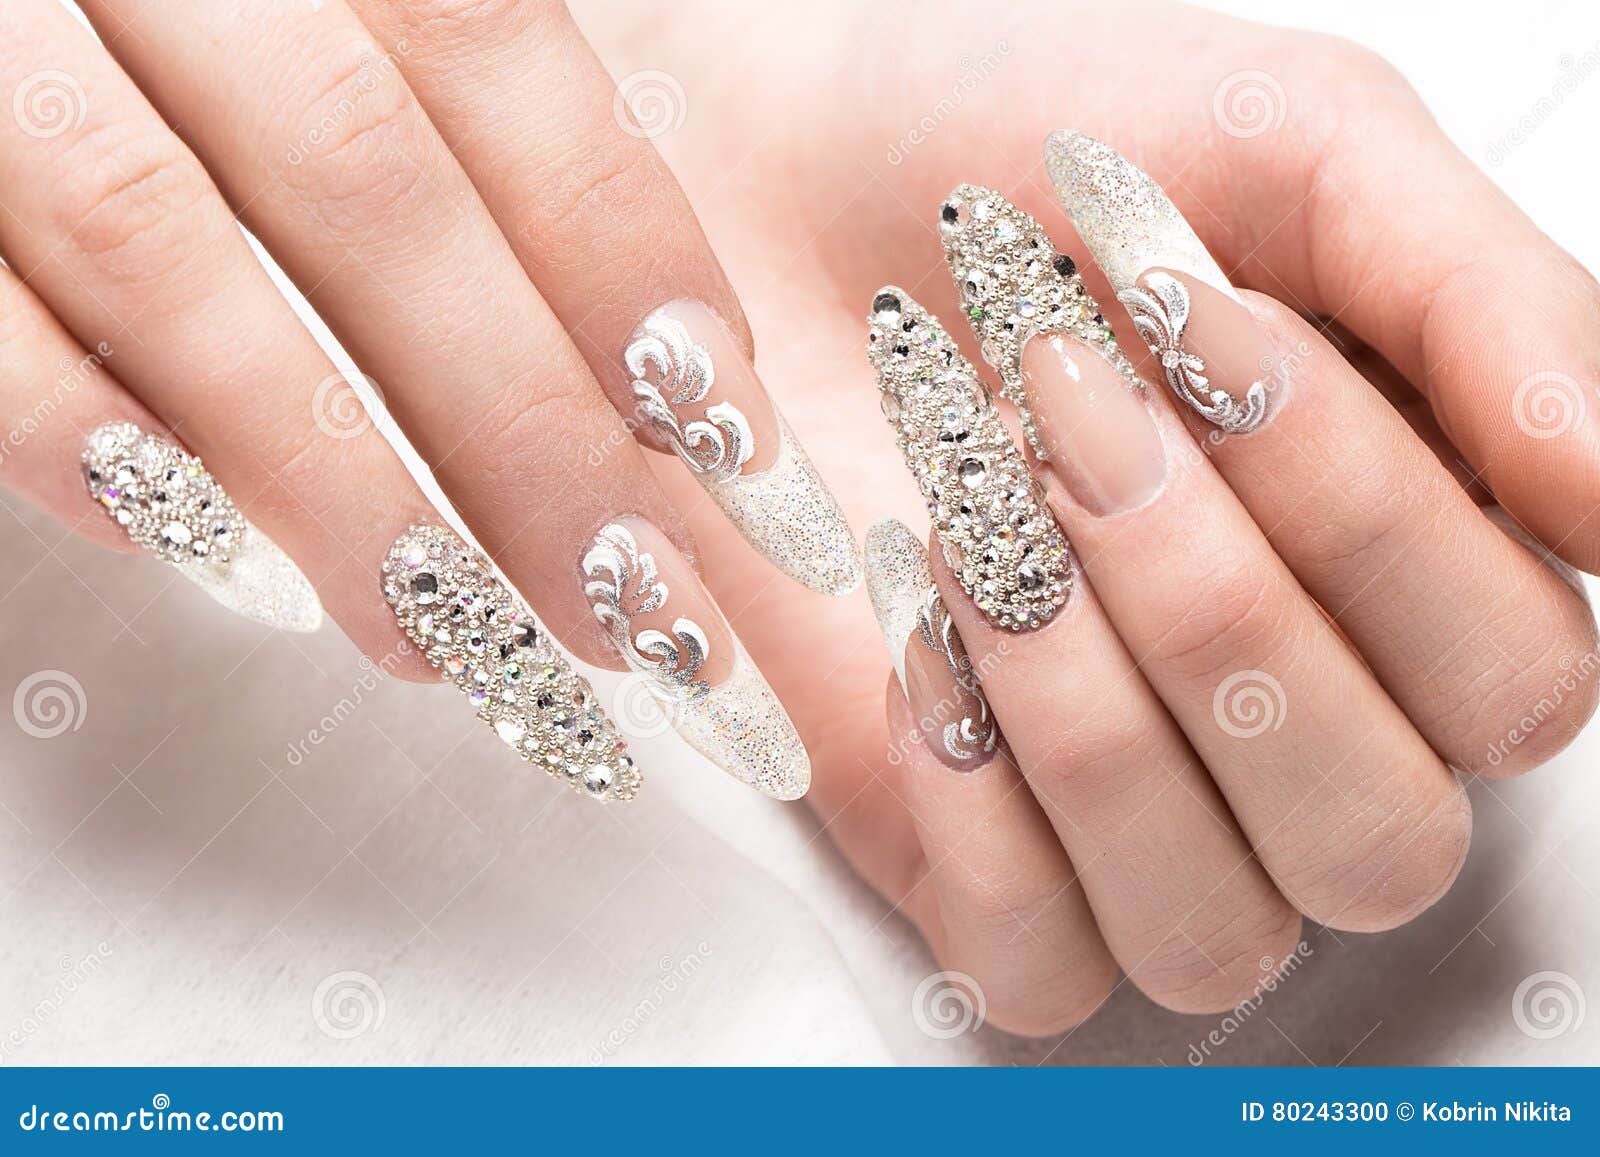 beautifil wedding manicure for the bride in gentle tones with rhinestone. nail . close-up